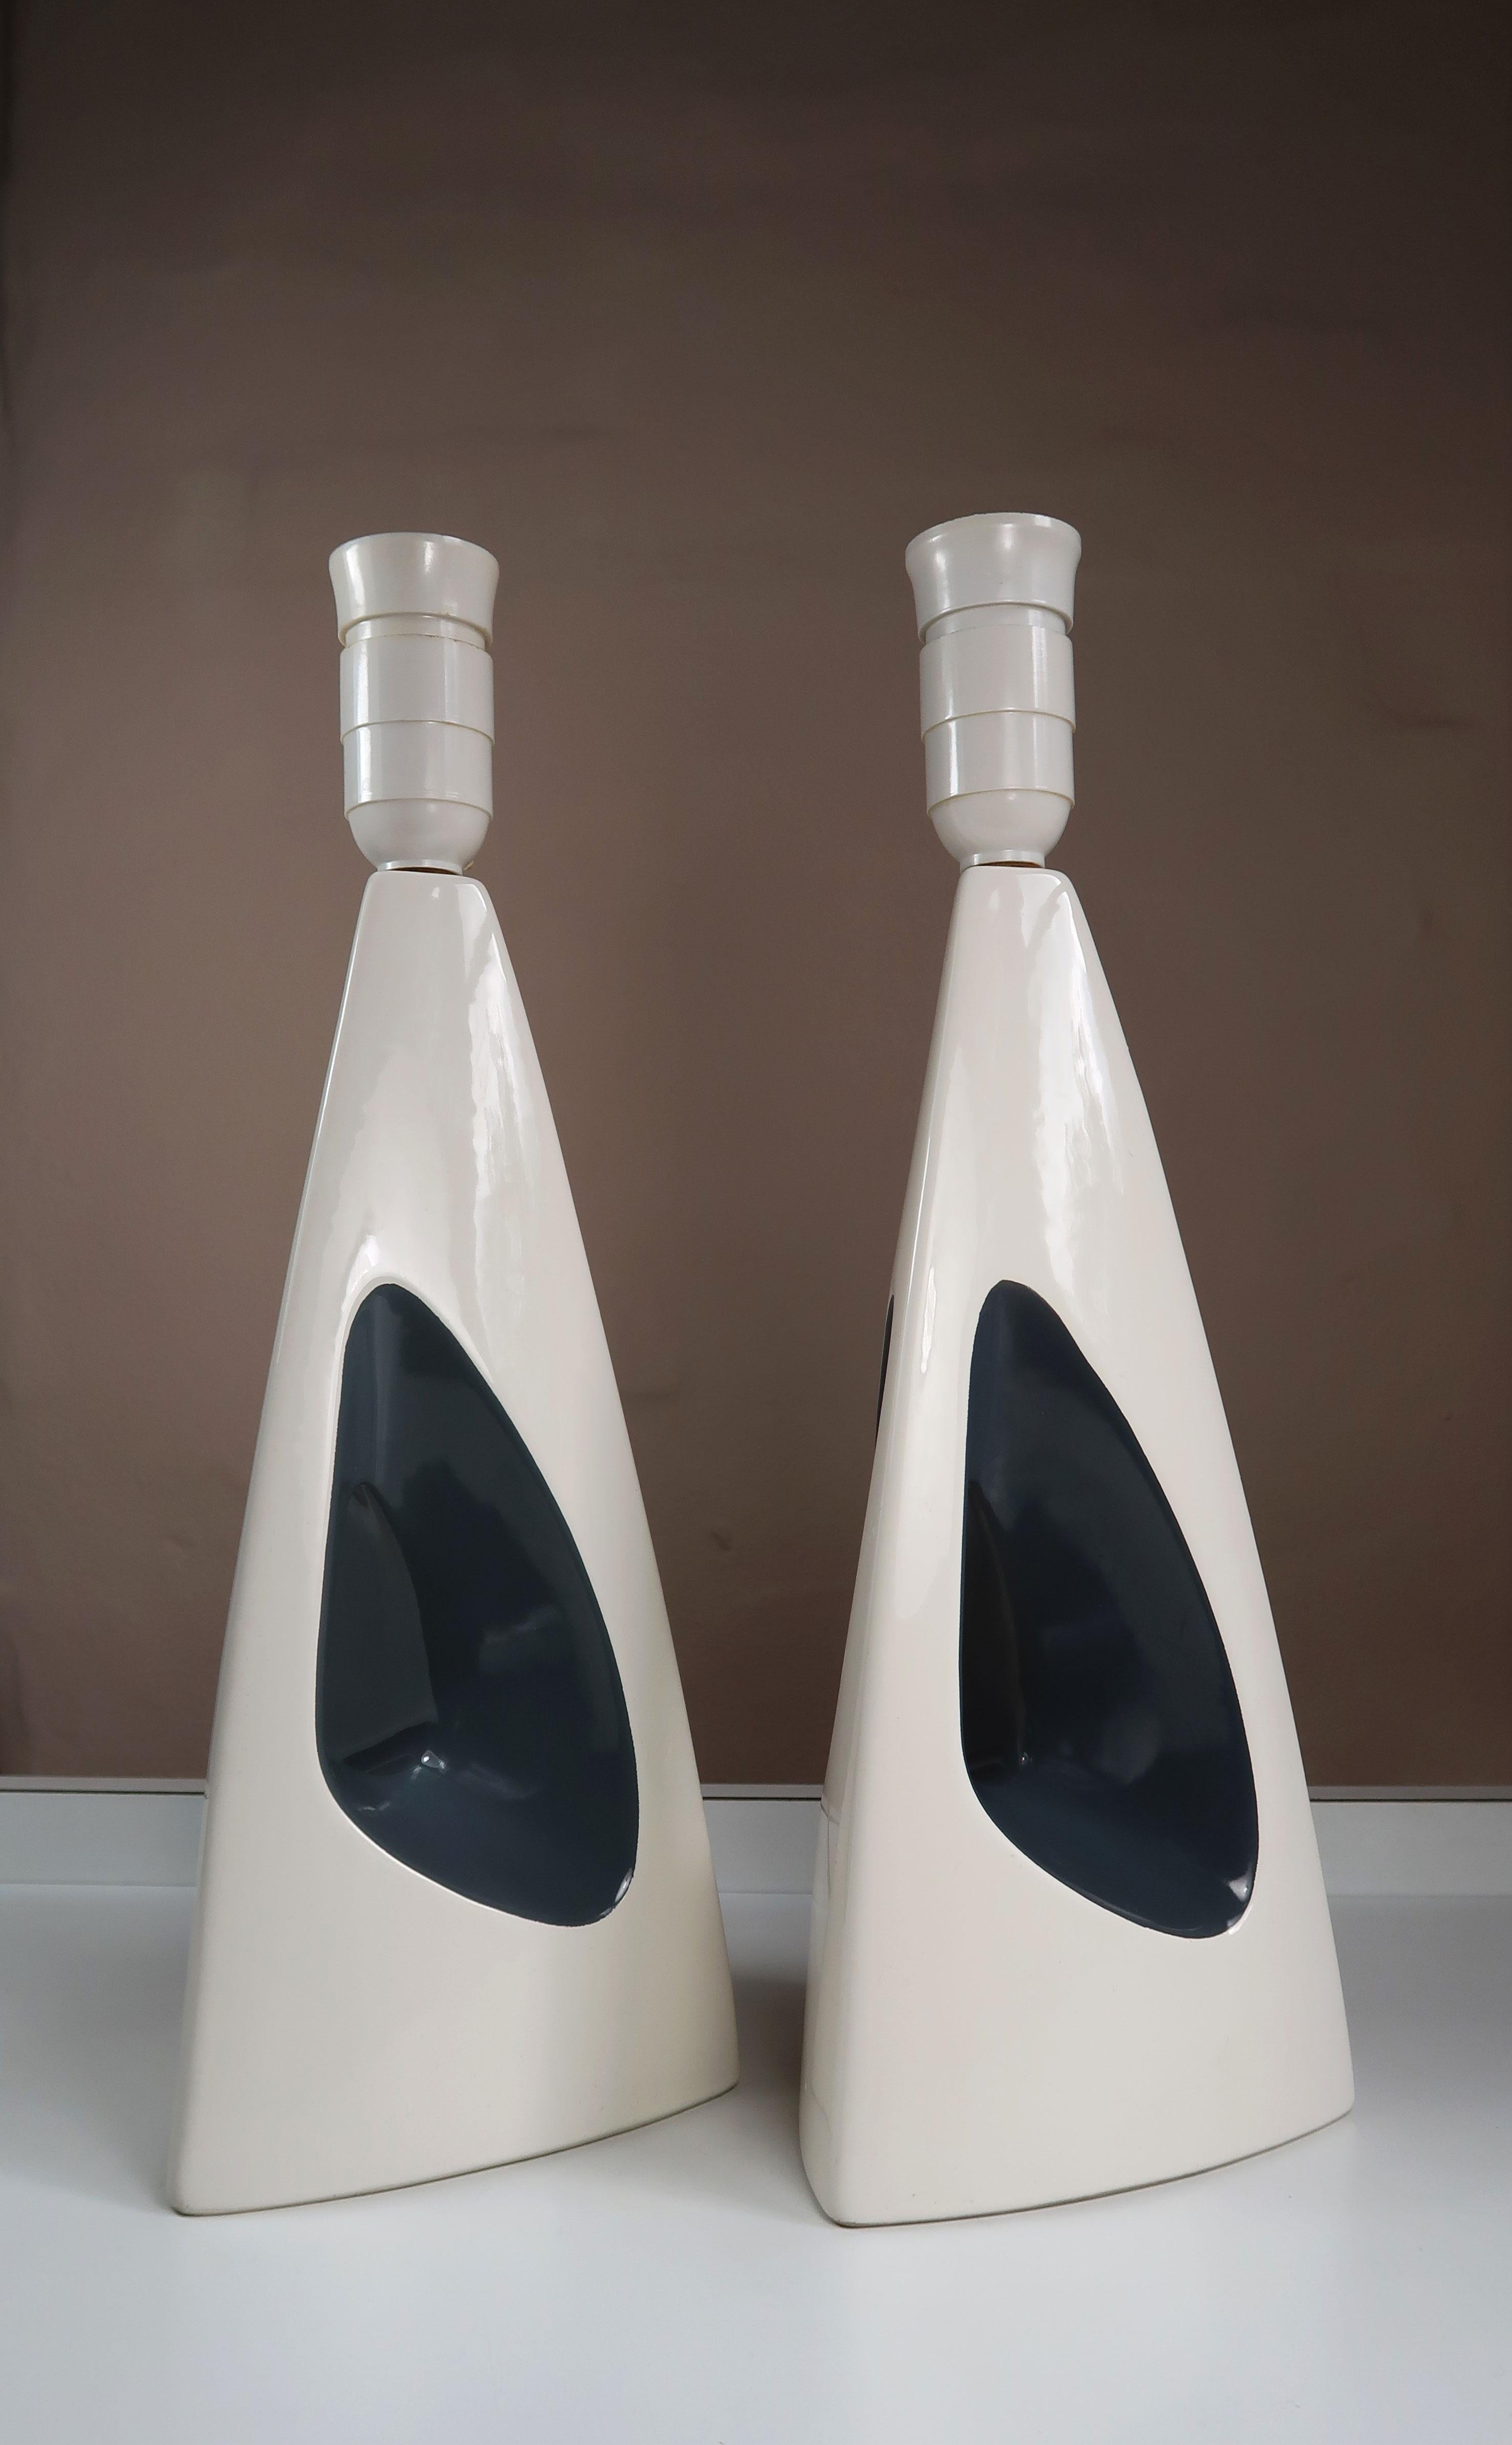 Faience Søholm 1960s Minimalist White, Anthracite Porcelain Table Lamps For Sale